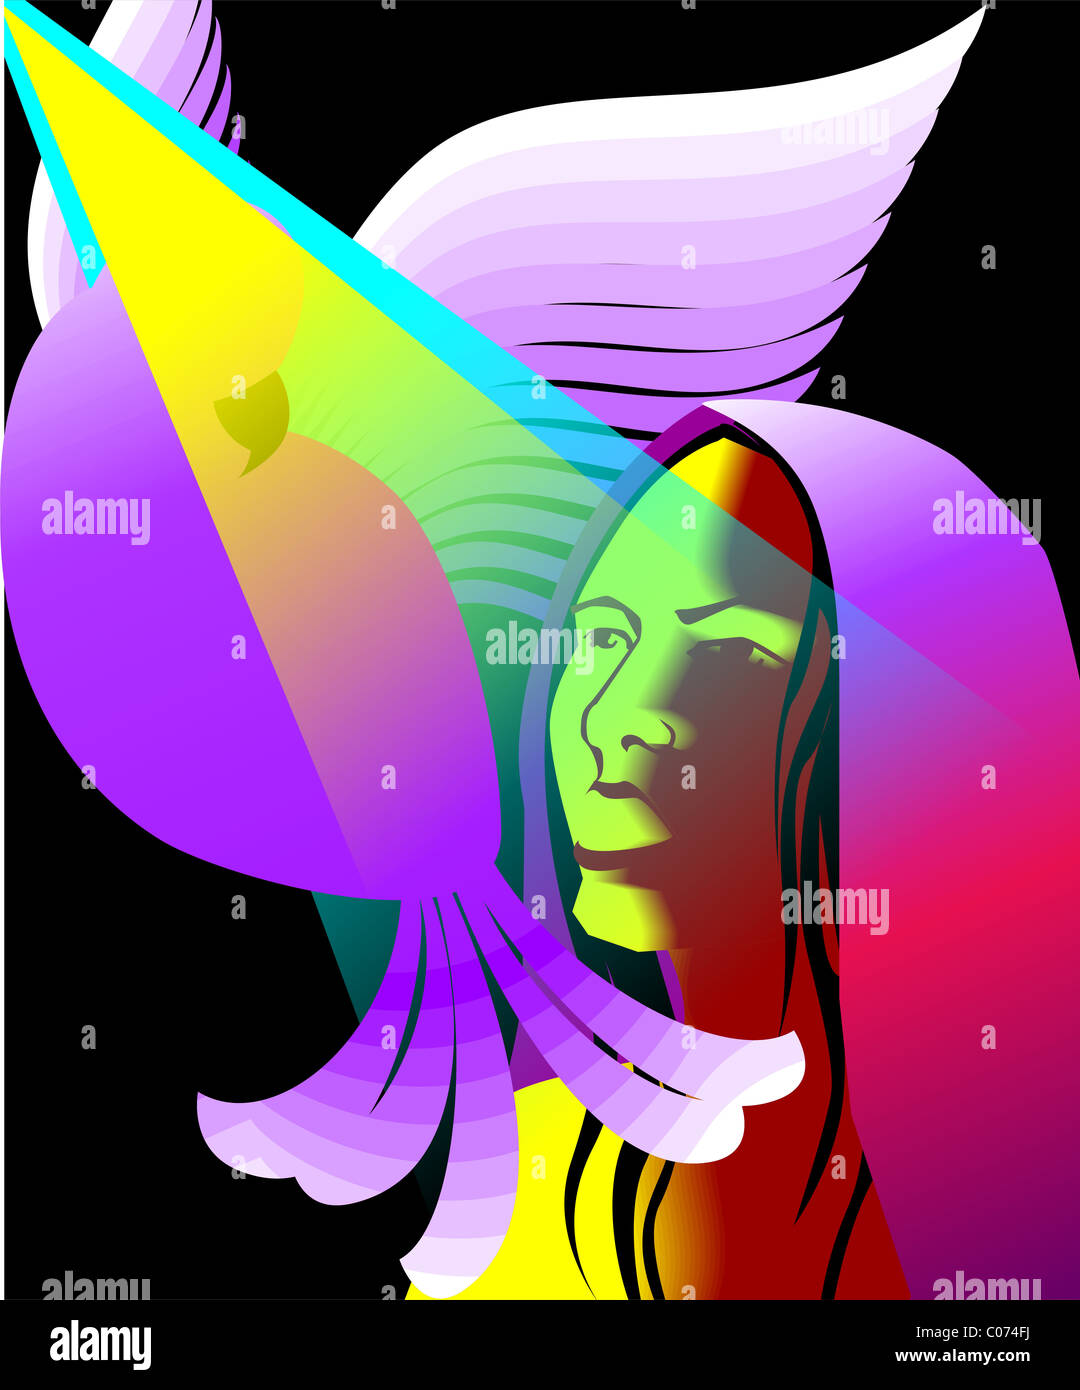 Digital painting of women face. The artist is feeling the sense of peace and array of hope for the lady. Stock Photo